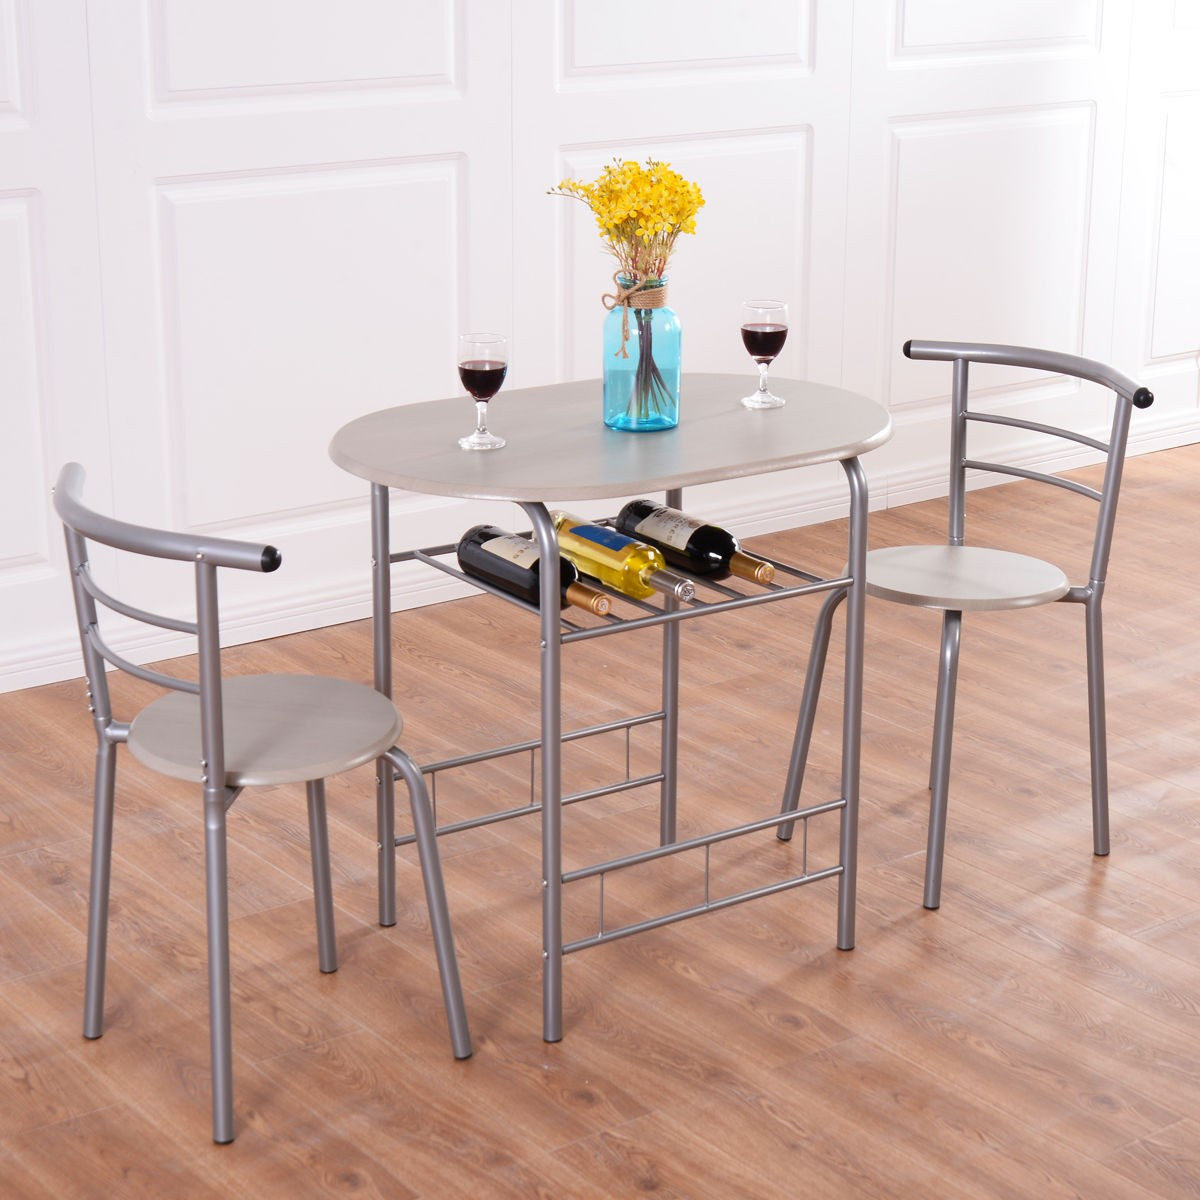 Small Kitchen Table Sets
 3pcs Bistro Dining Set Small Kitchen Indoor Outdoor Table